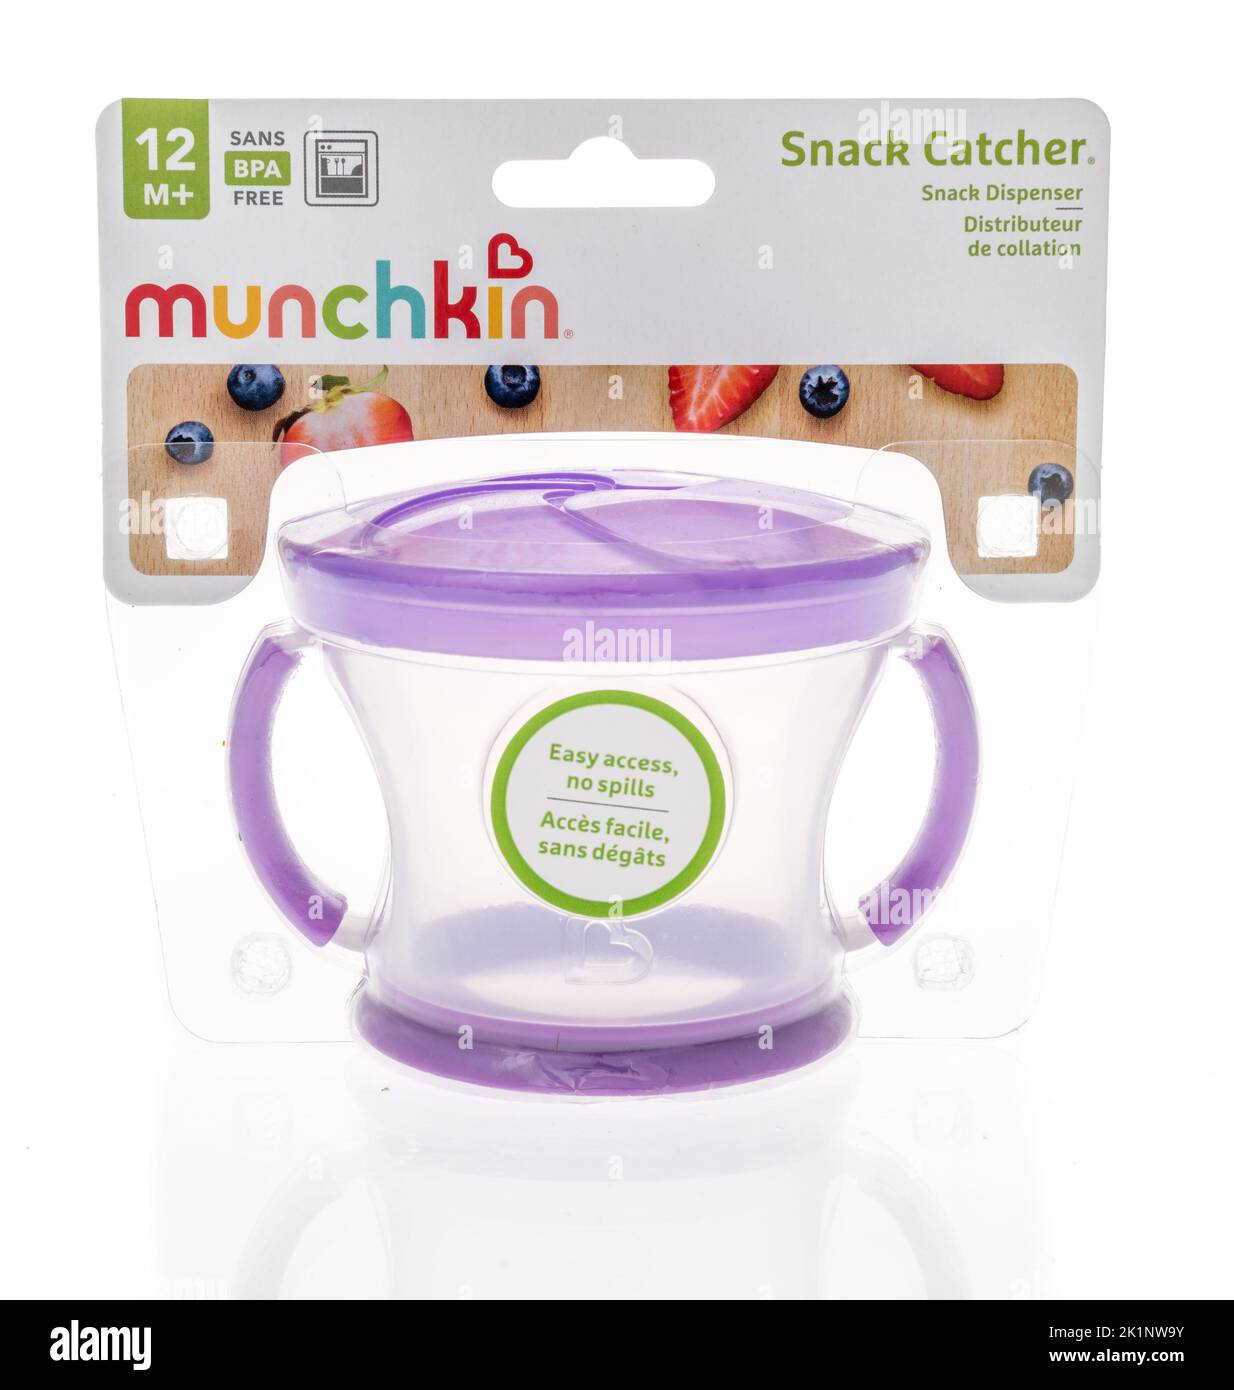 Winneconne, WI - 18 August 2022: A package of Munchkin snack catcher snack dispenser on an isolated background. Stock Photo